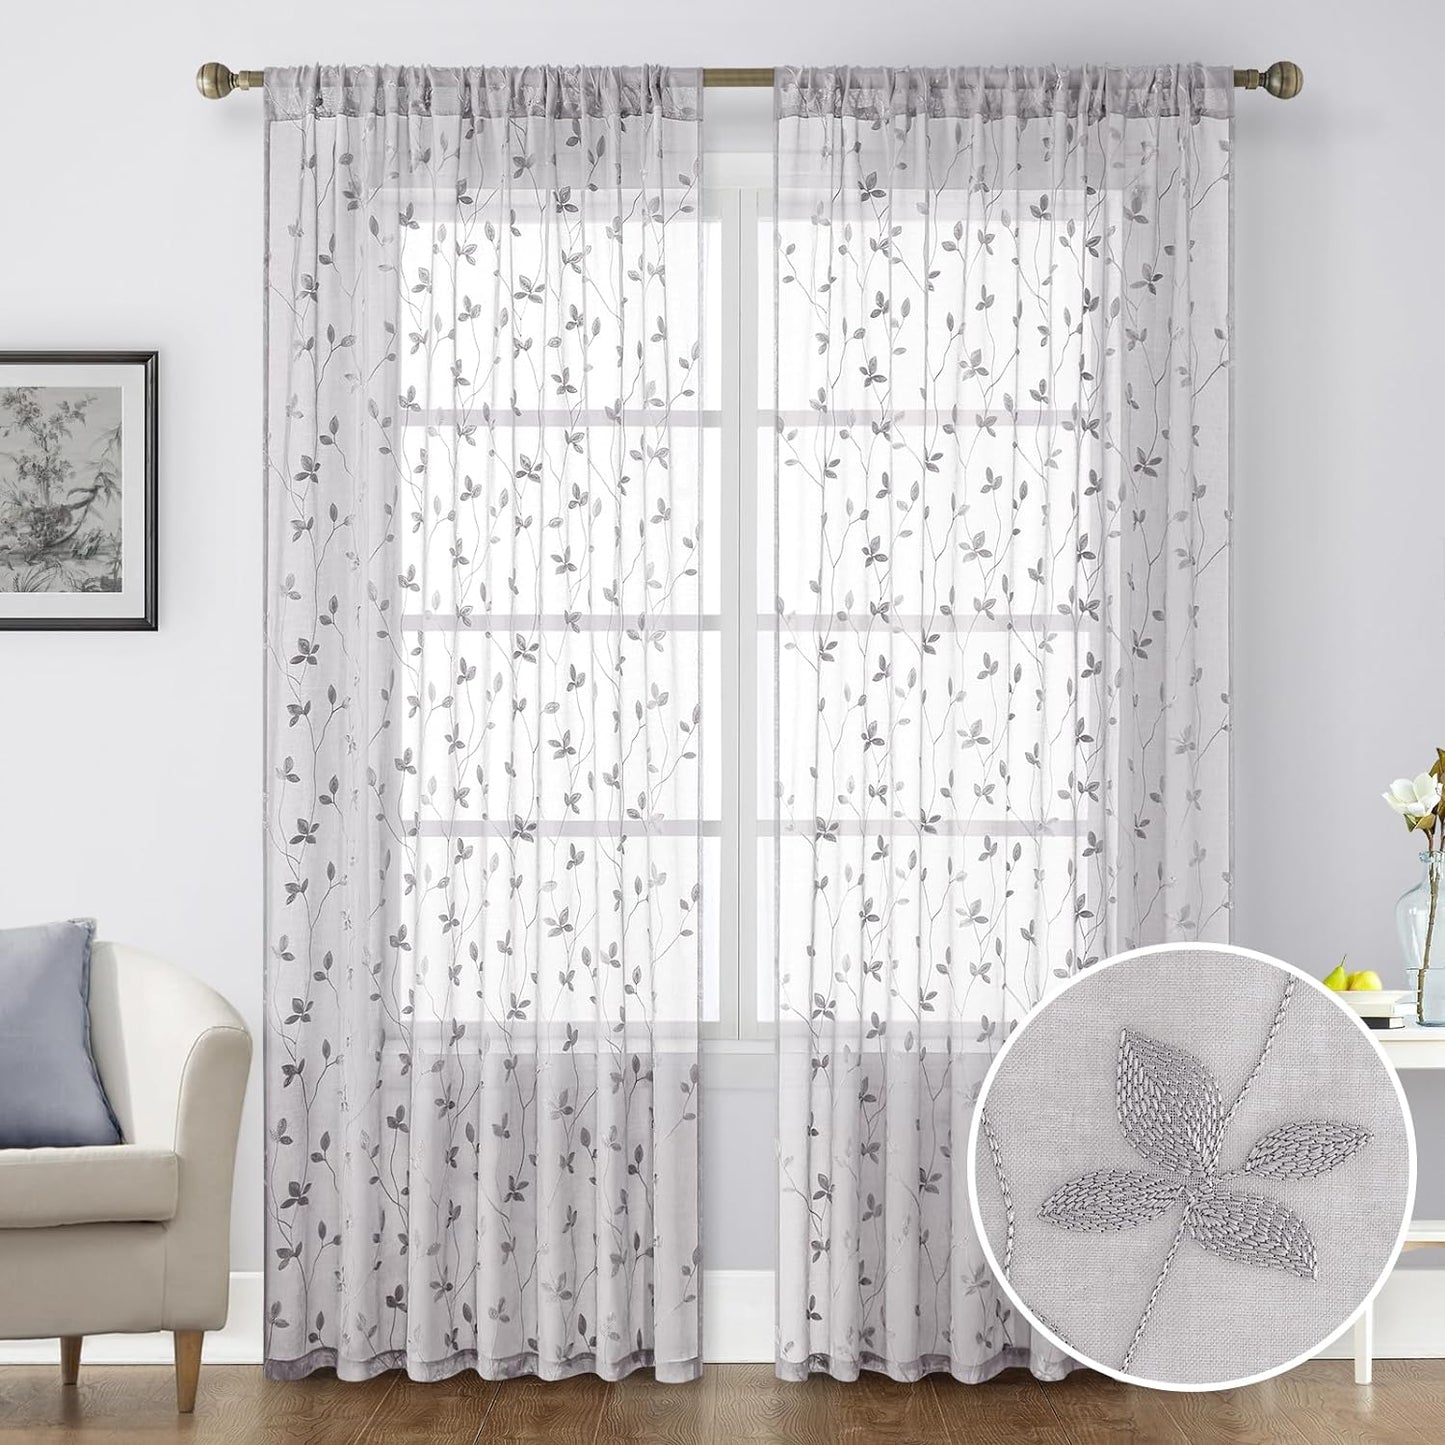 HOMEIDEAS Sage Green Sheer Curtains 52 X 63 Inches Length 2 Panels Embroidered Leaf Pattern Pocket Faux Linen Floral Semi Sheer Voile Window Curtains/Drapes for Bedroom Living Room  HOMEIDEAS Vine Light Grey W52" X L96" 